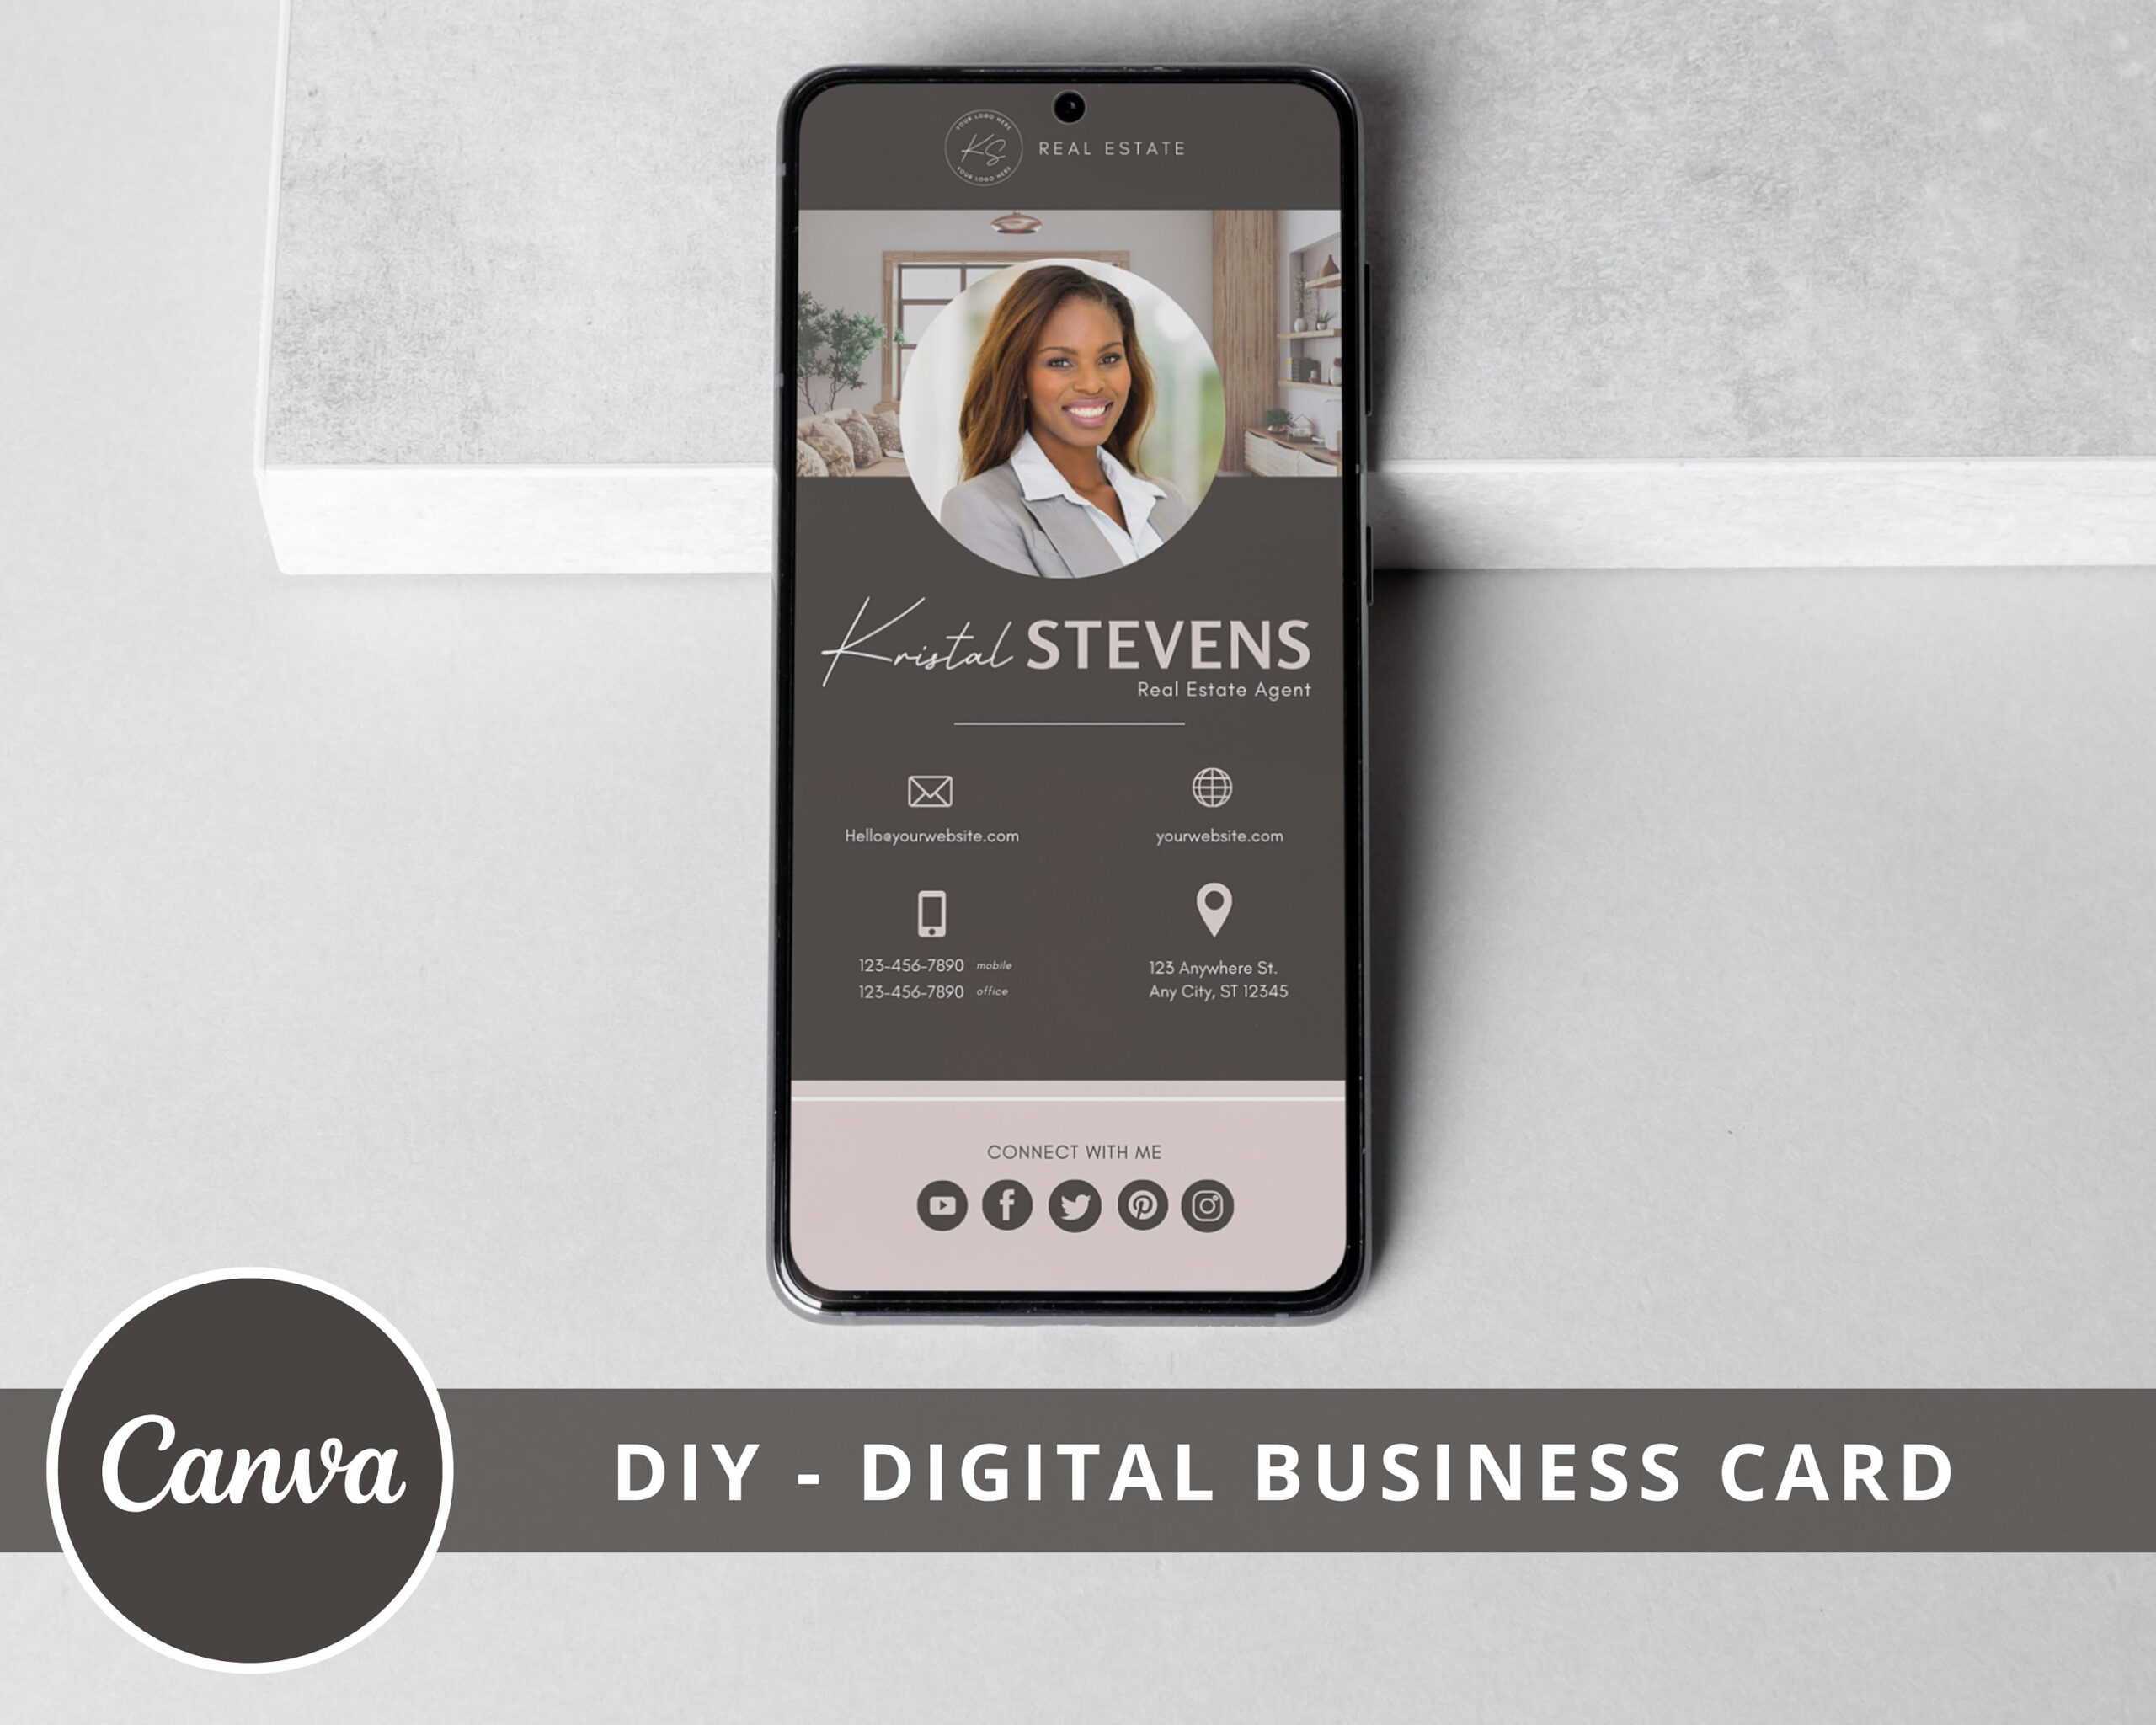 Editable Virtual Business Card -  Digital Business Card for Real Estate Agents - DIY Canva Template - VCard Template - Instant Download